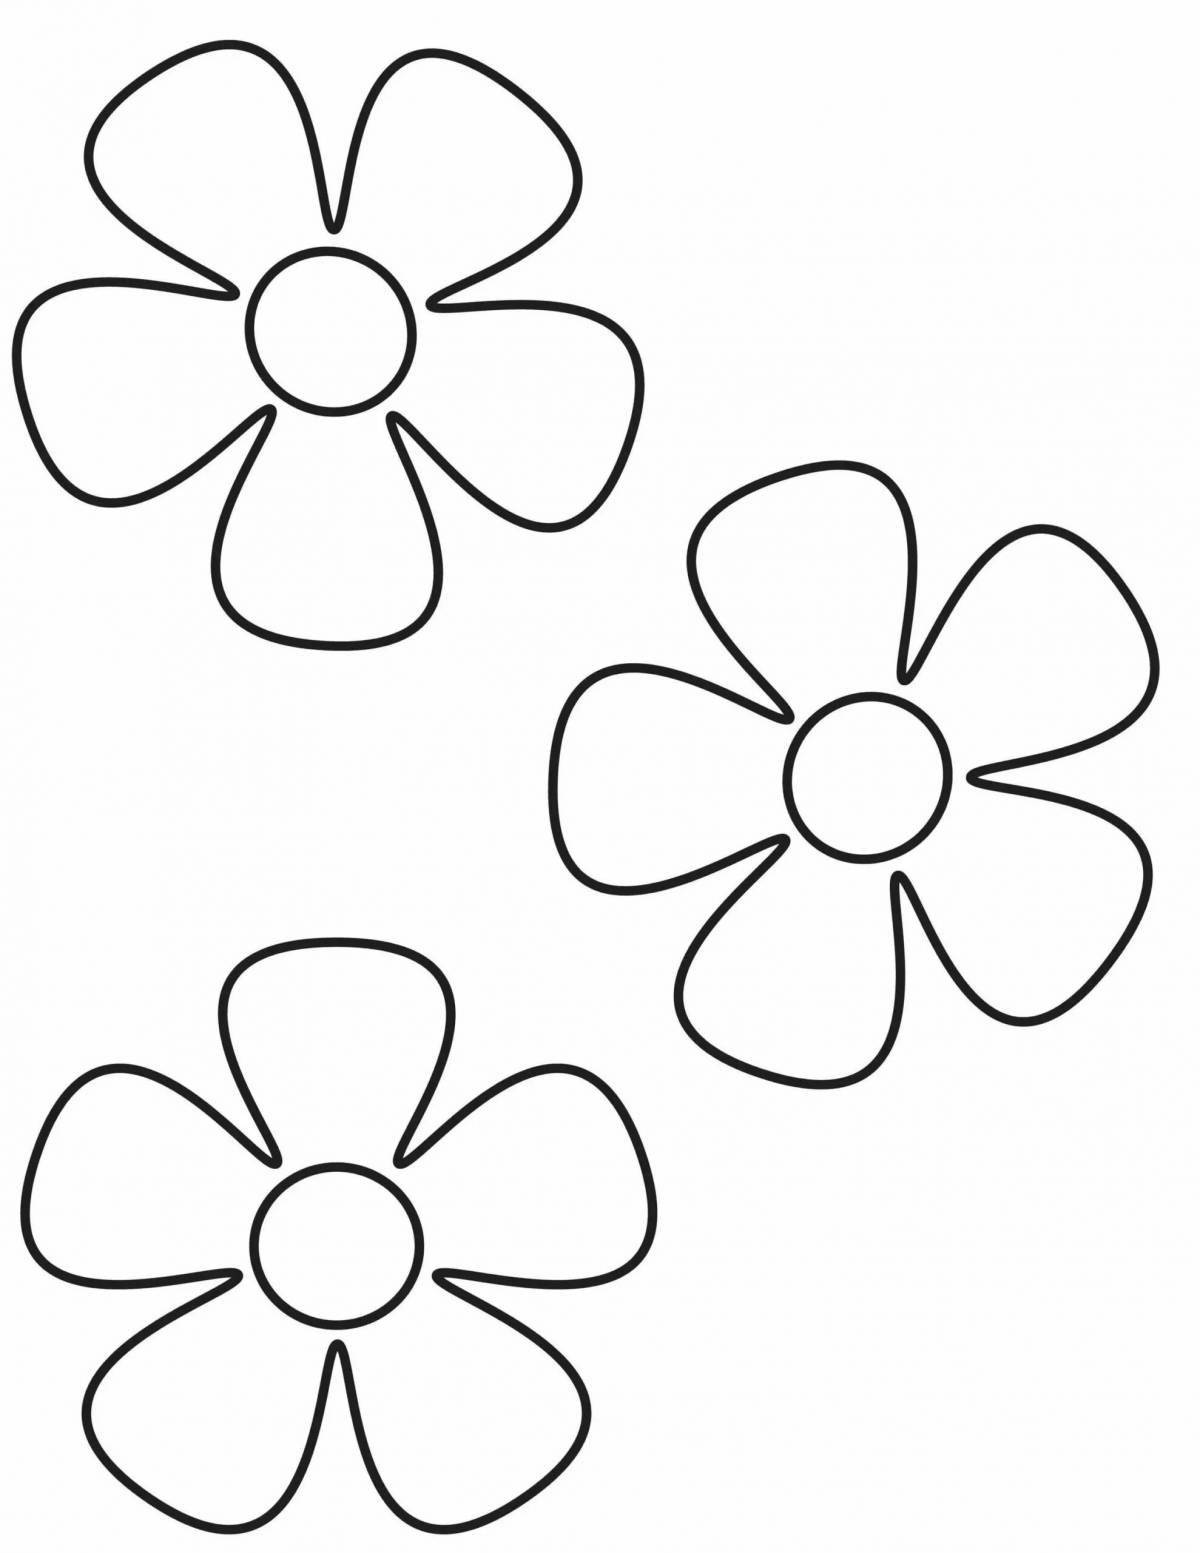 Violent coloring flower for children 3-4 years old